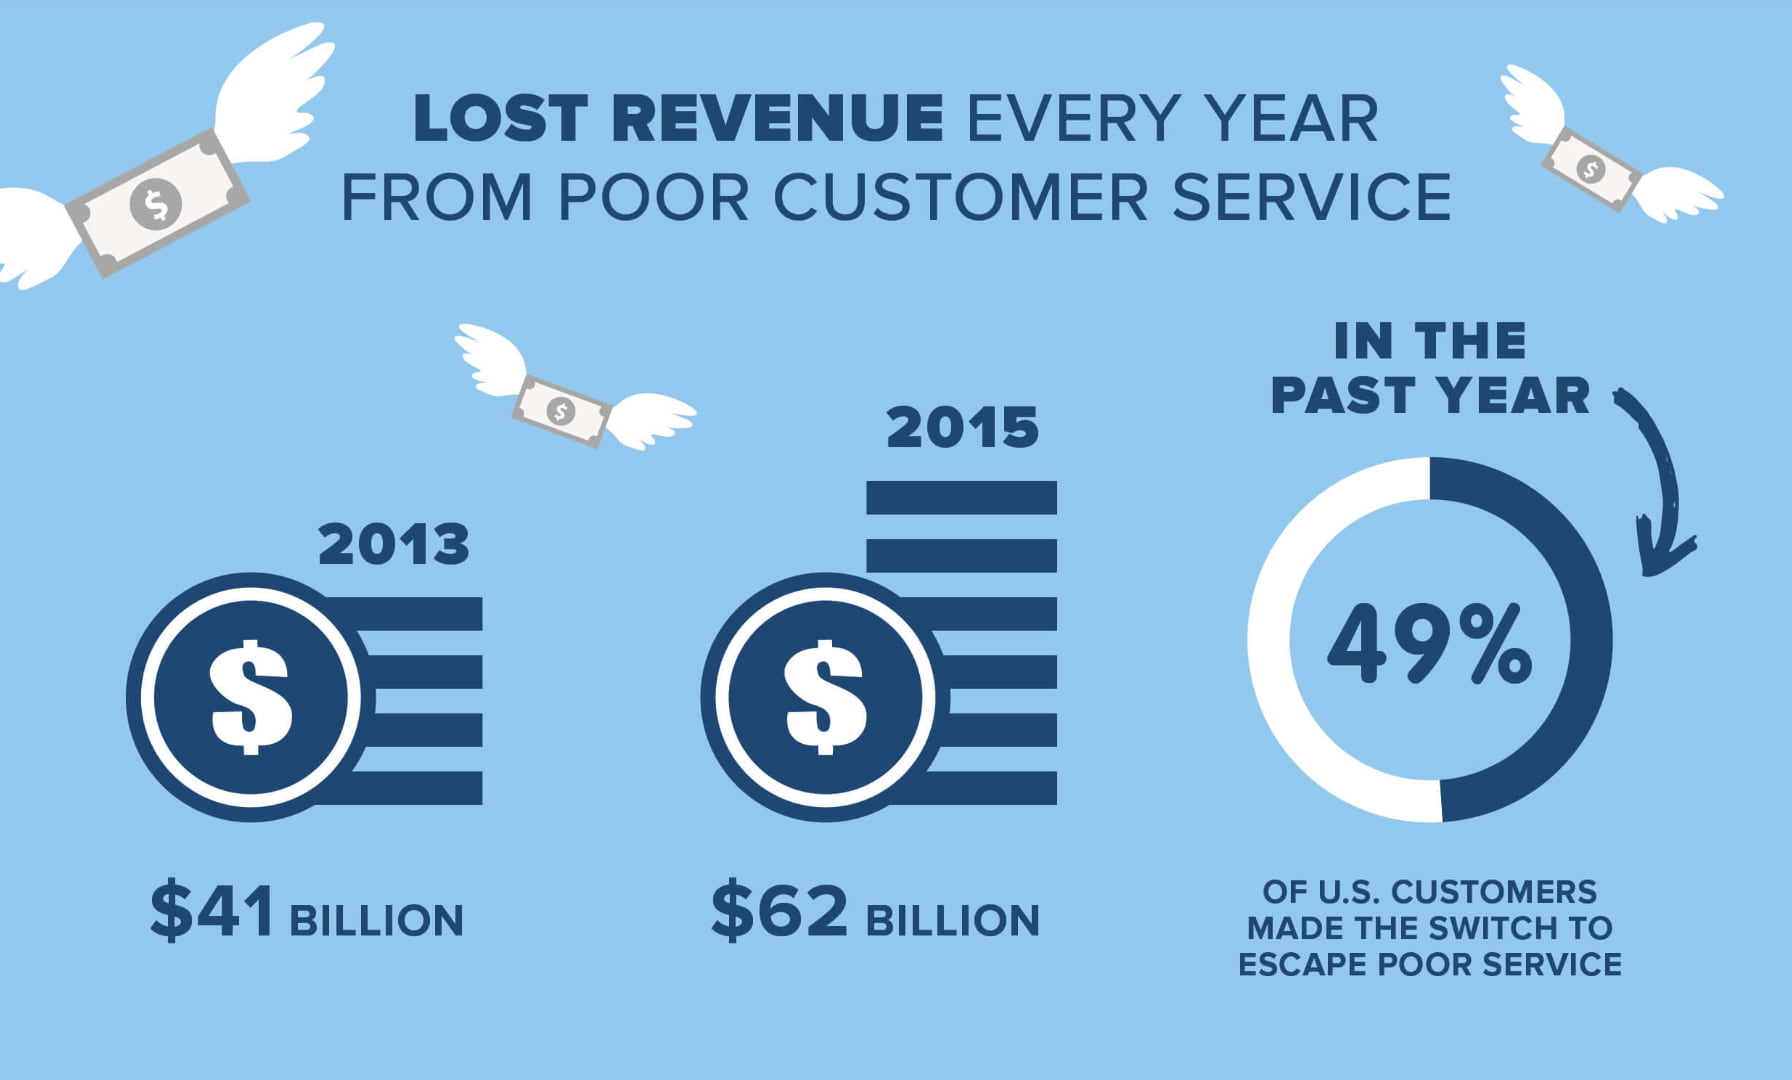 Lost revenue from poor customer service